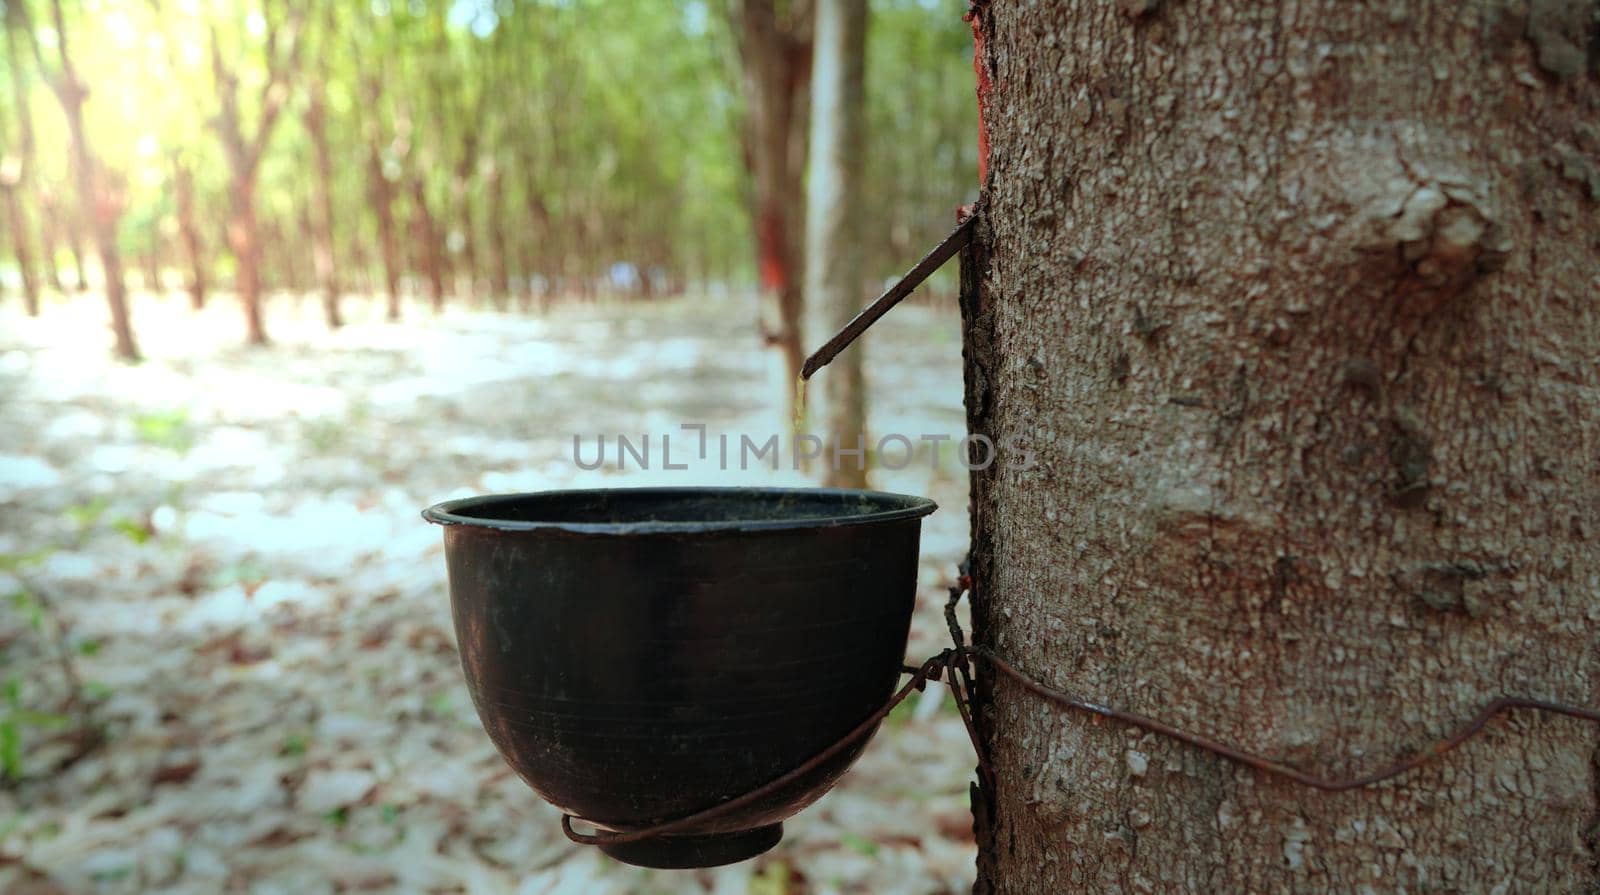 Harvesting in rubber plantations in the Northeast of Thailand.